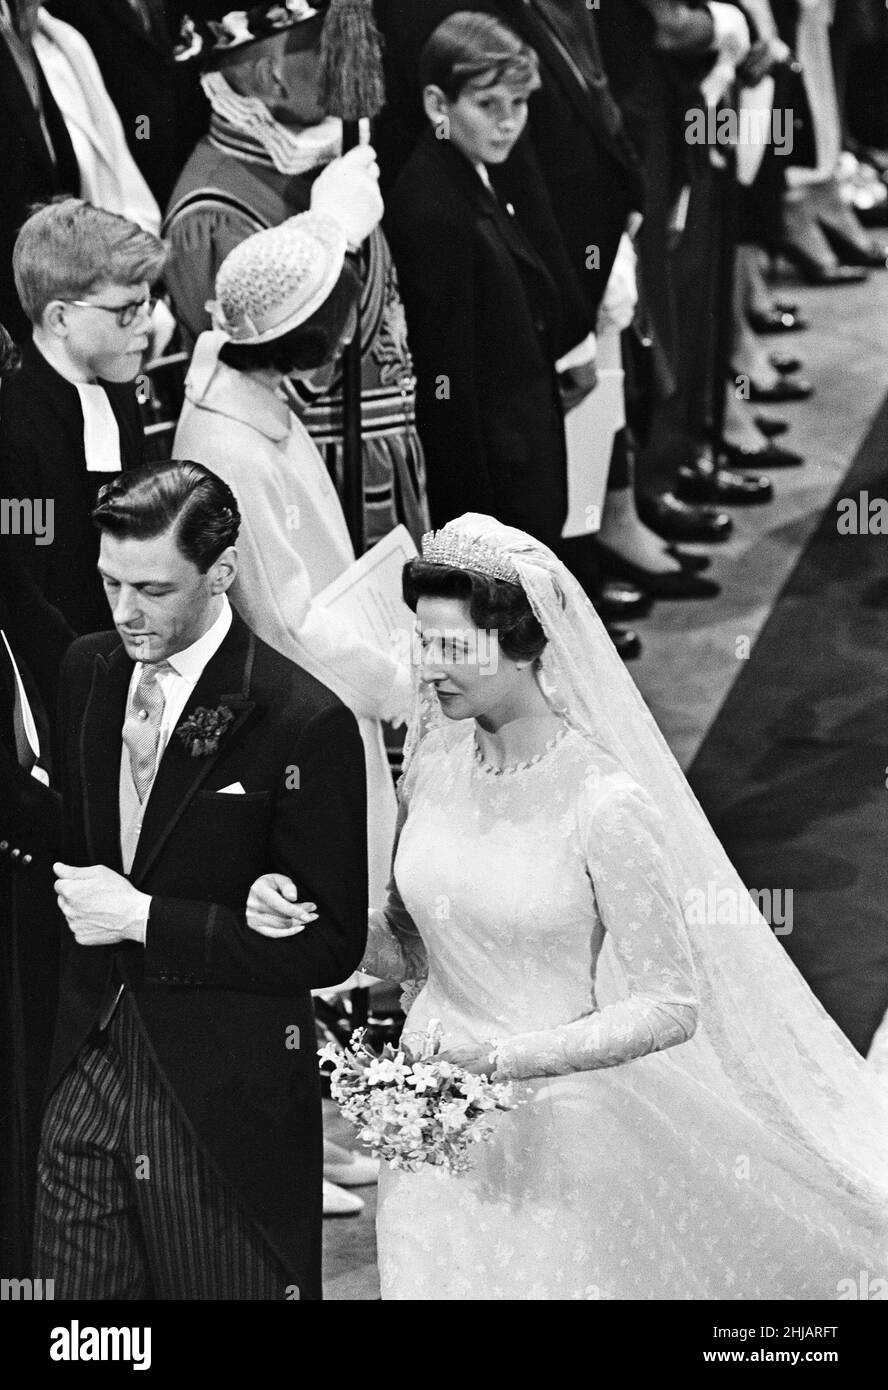 The wedding of Princess Alexandra of Kent and Angus Ogilvy at Westminster Abbey. 24th April 1963. Stock Photo